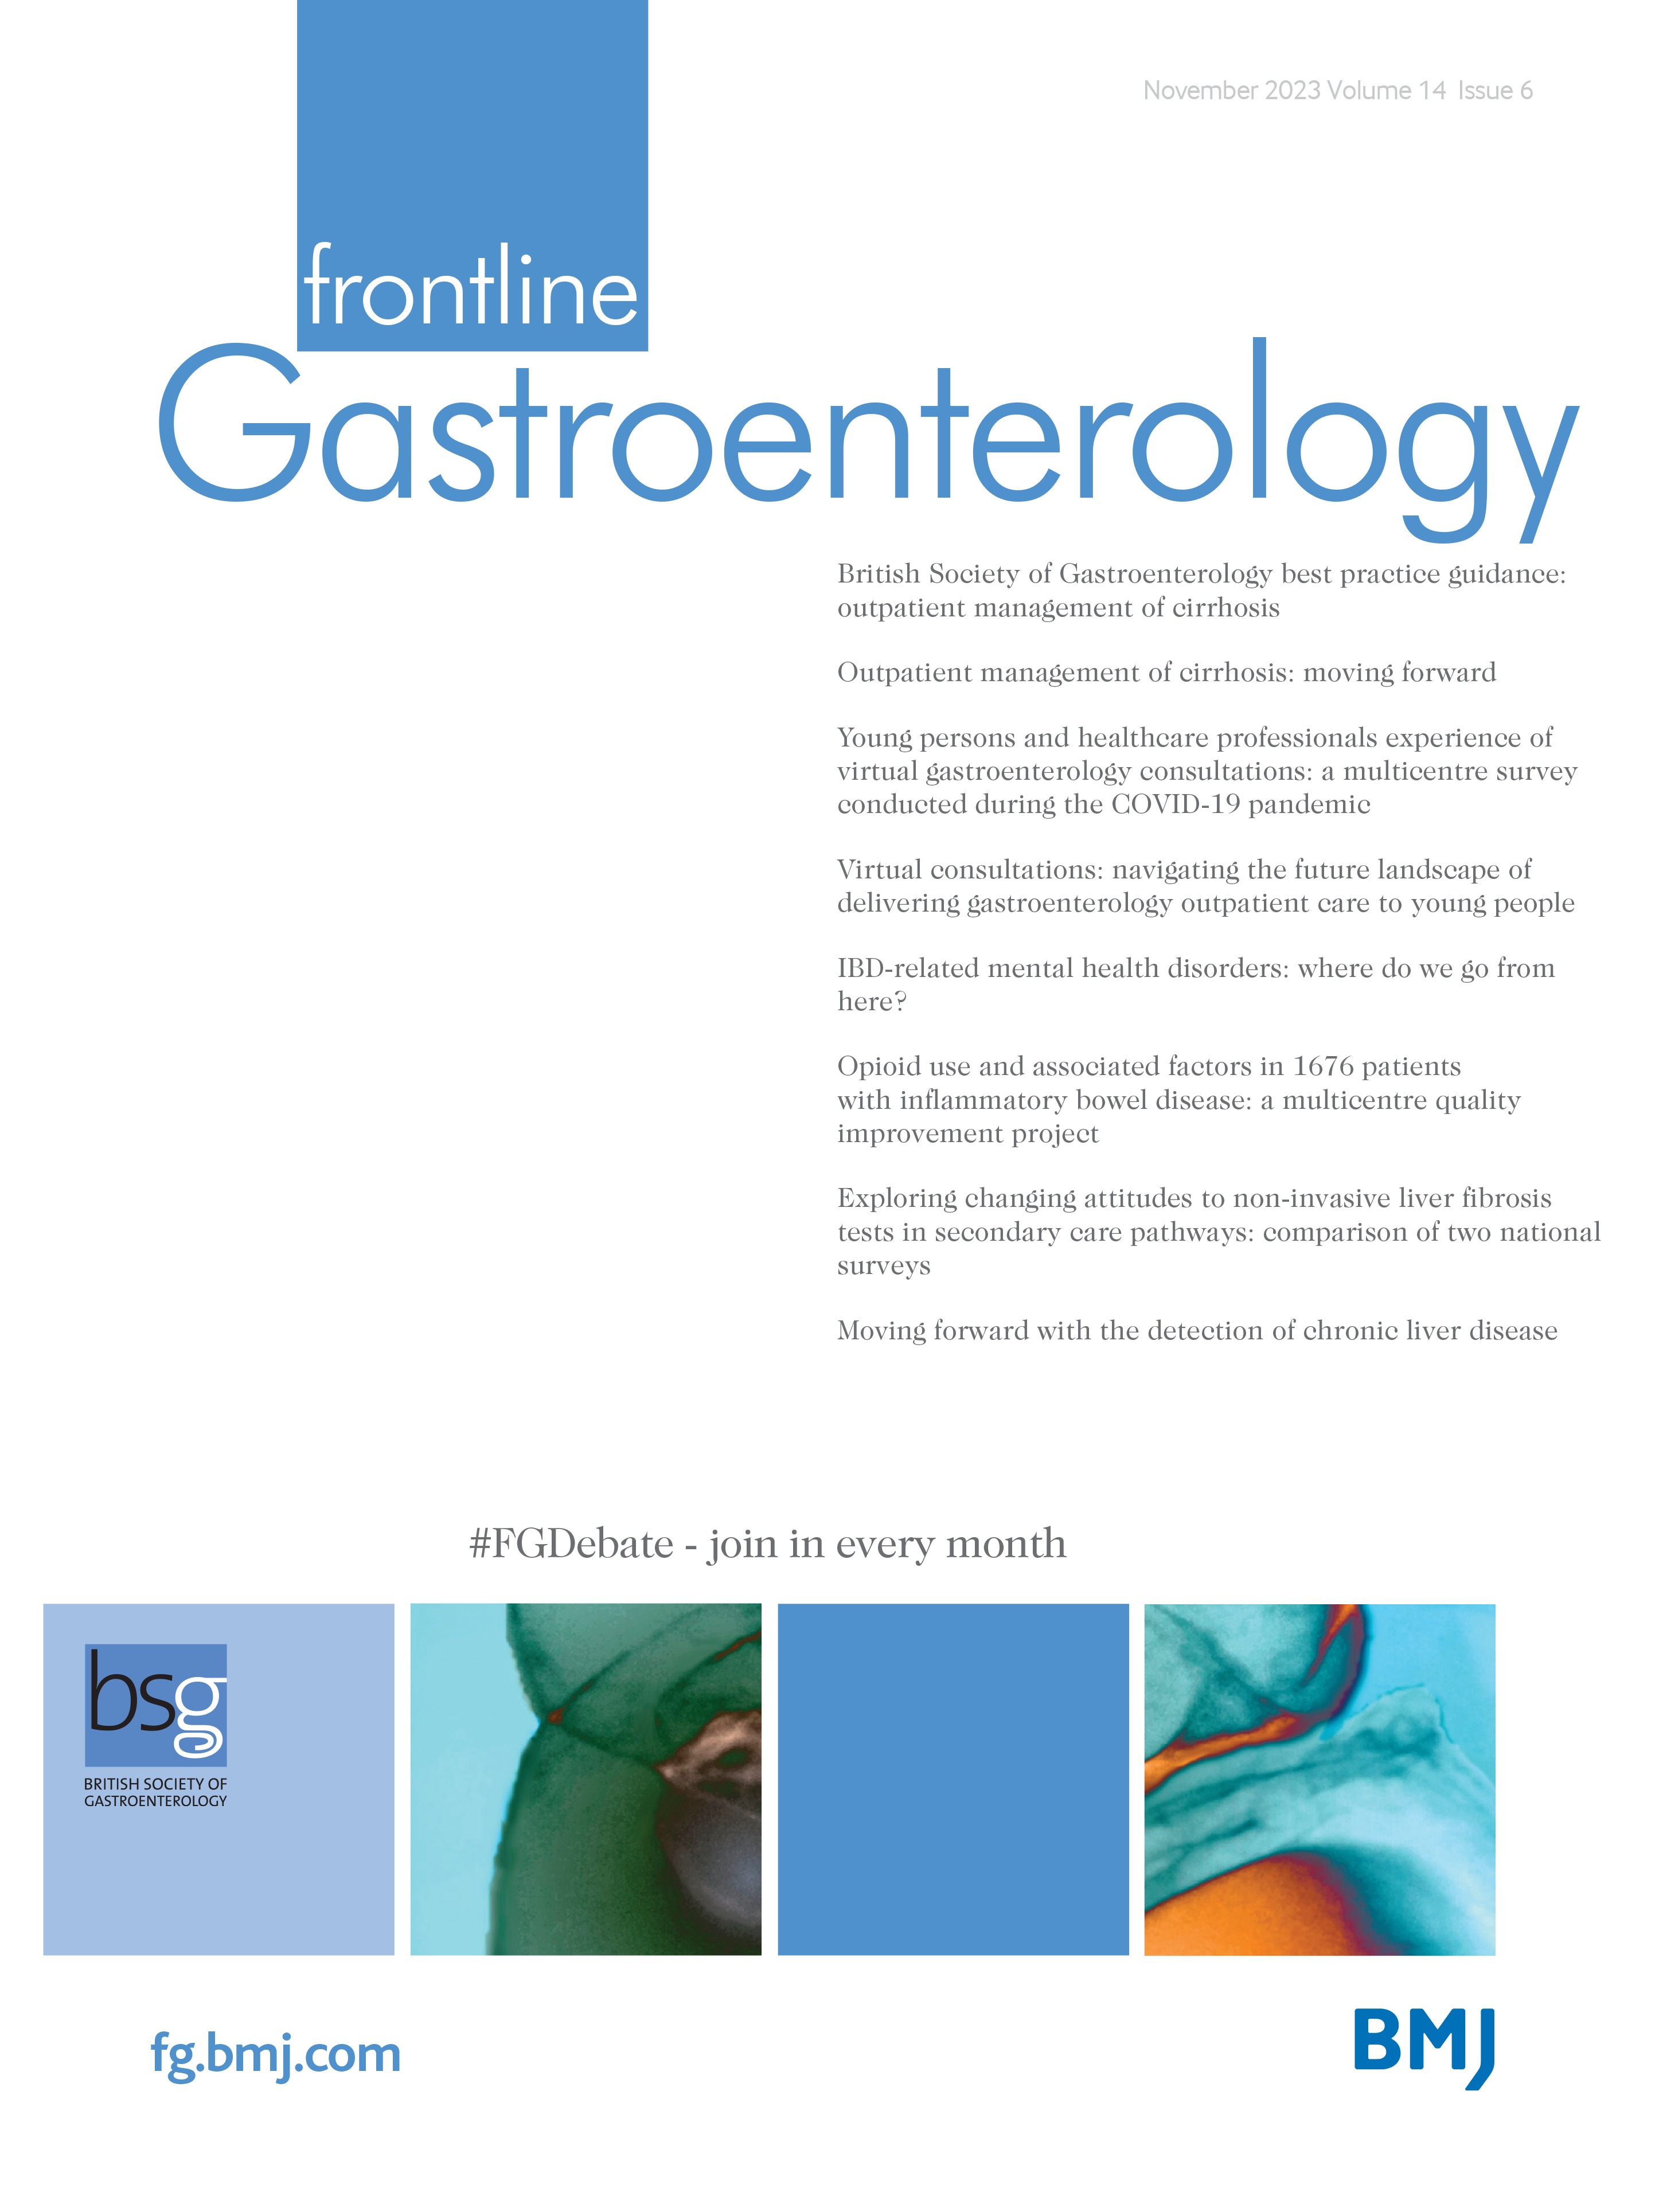 British Society of Gastroenterology Best Practice Guidance: outpatient management of cirrhosis - part 3: special circumstances